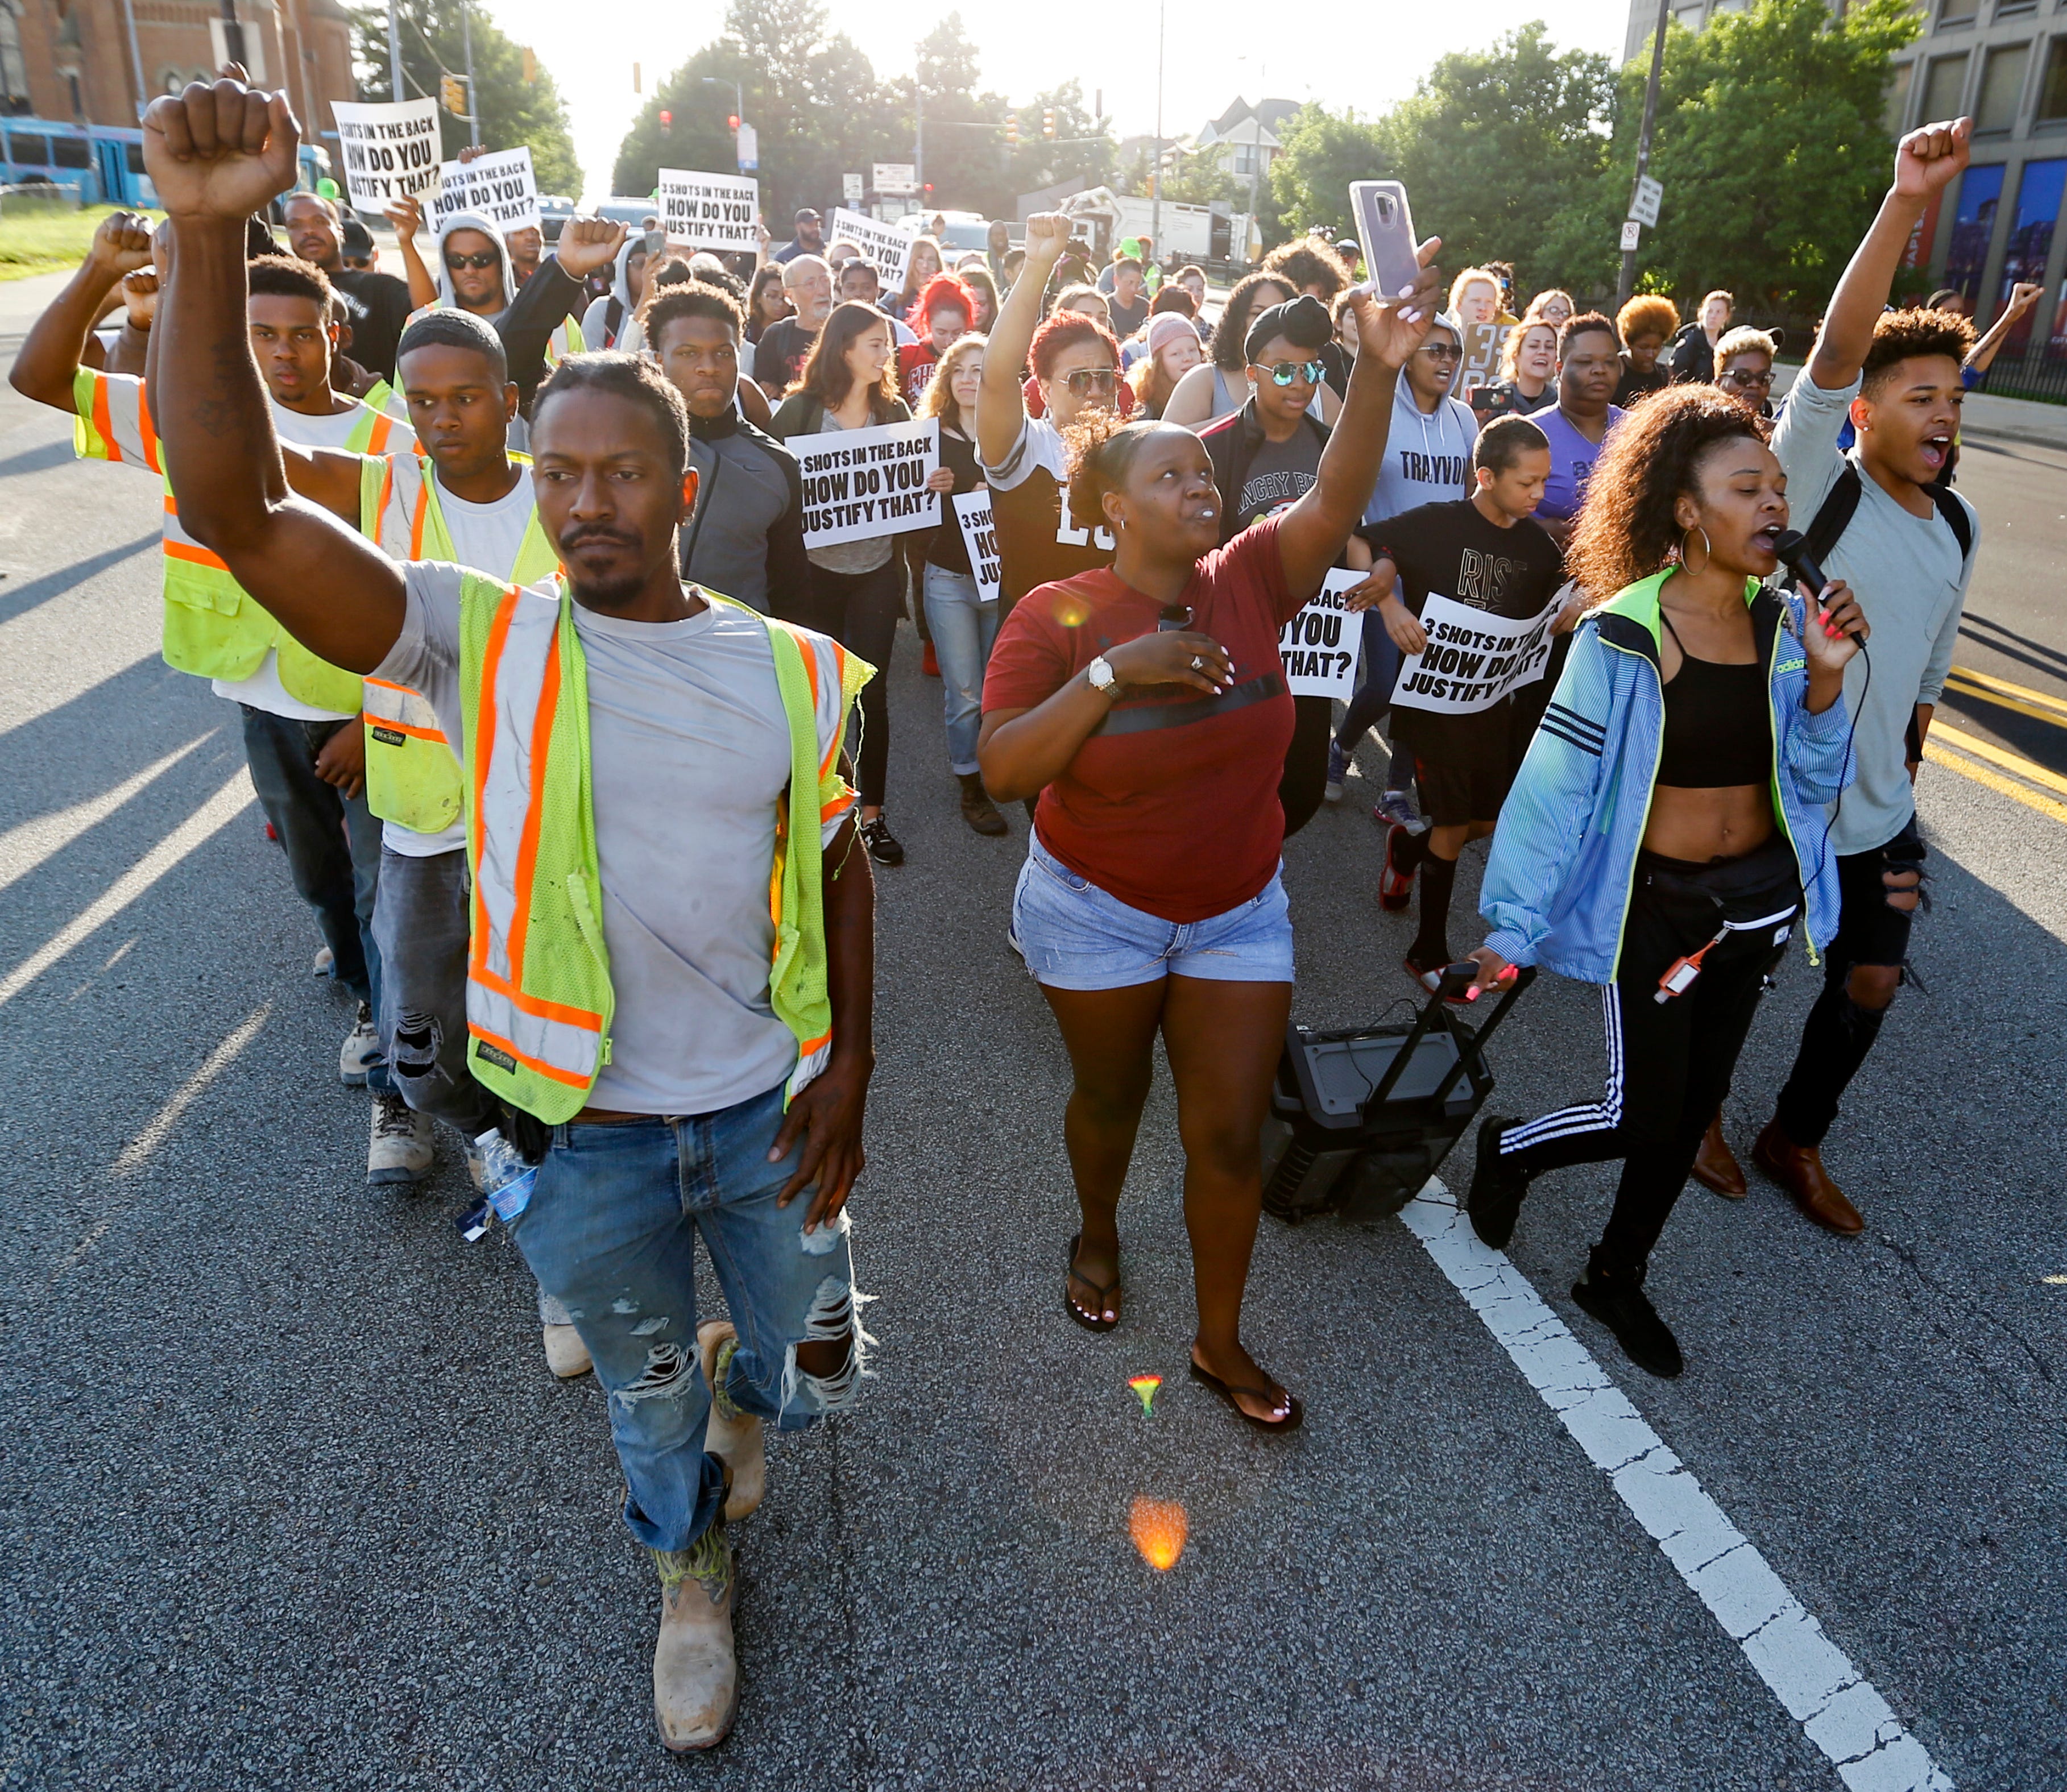 People start a protest march against the shooting death of Antwon Rose Jr. on June 26, 2018, in Pittsburgh. Rose was fatally shot by a police officer seconds after he fled a traffic stop June 19, in the suburb of East Pittsburgh.